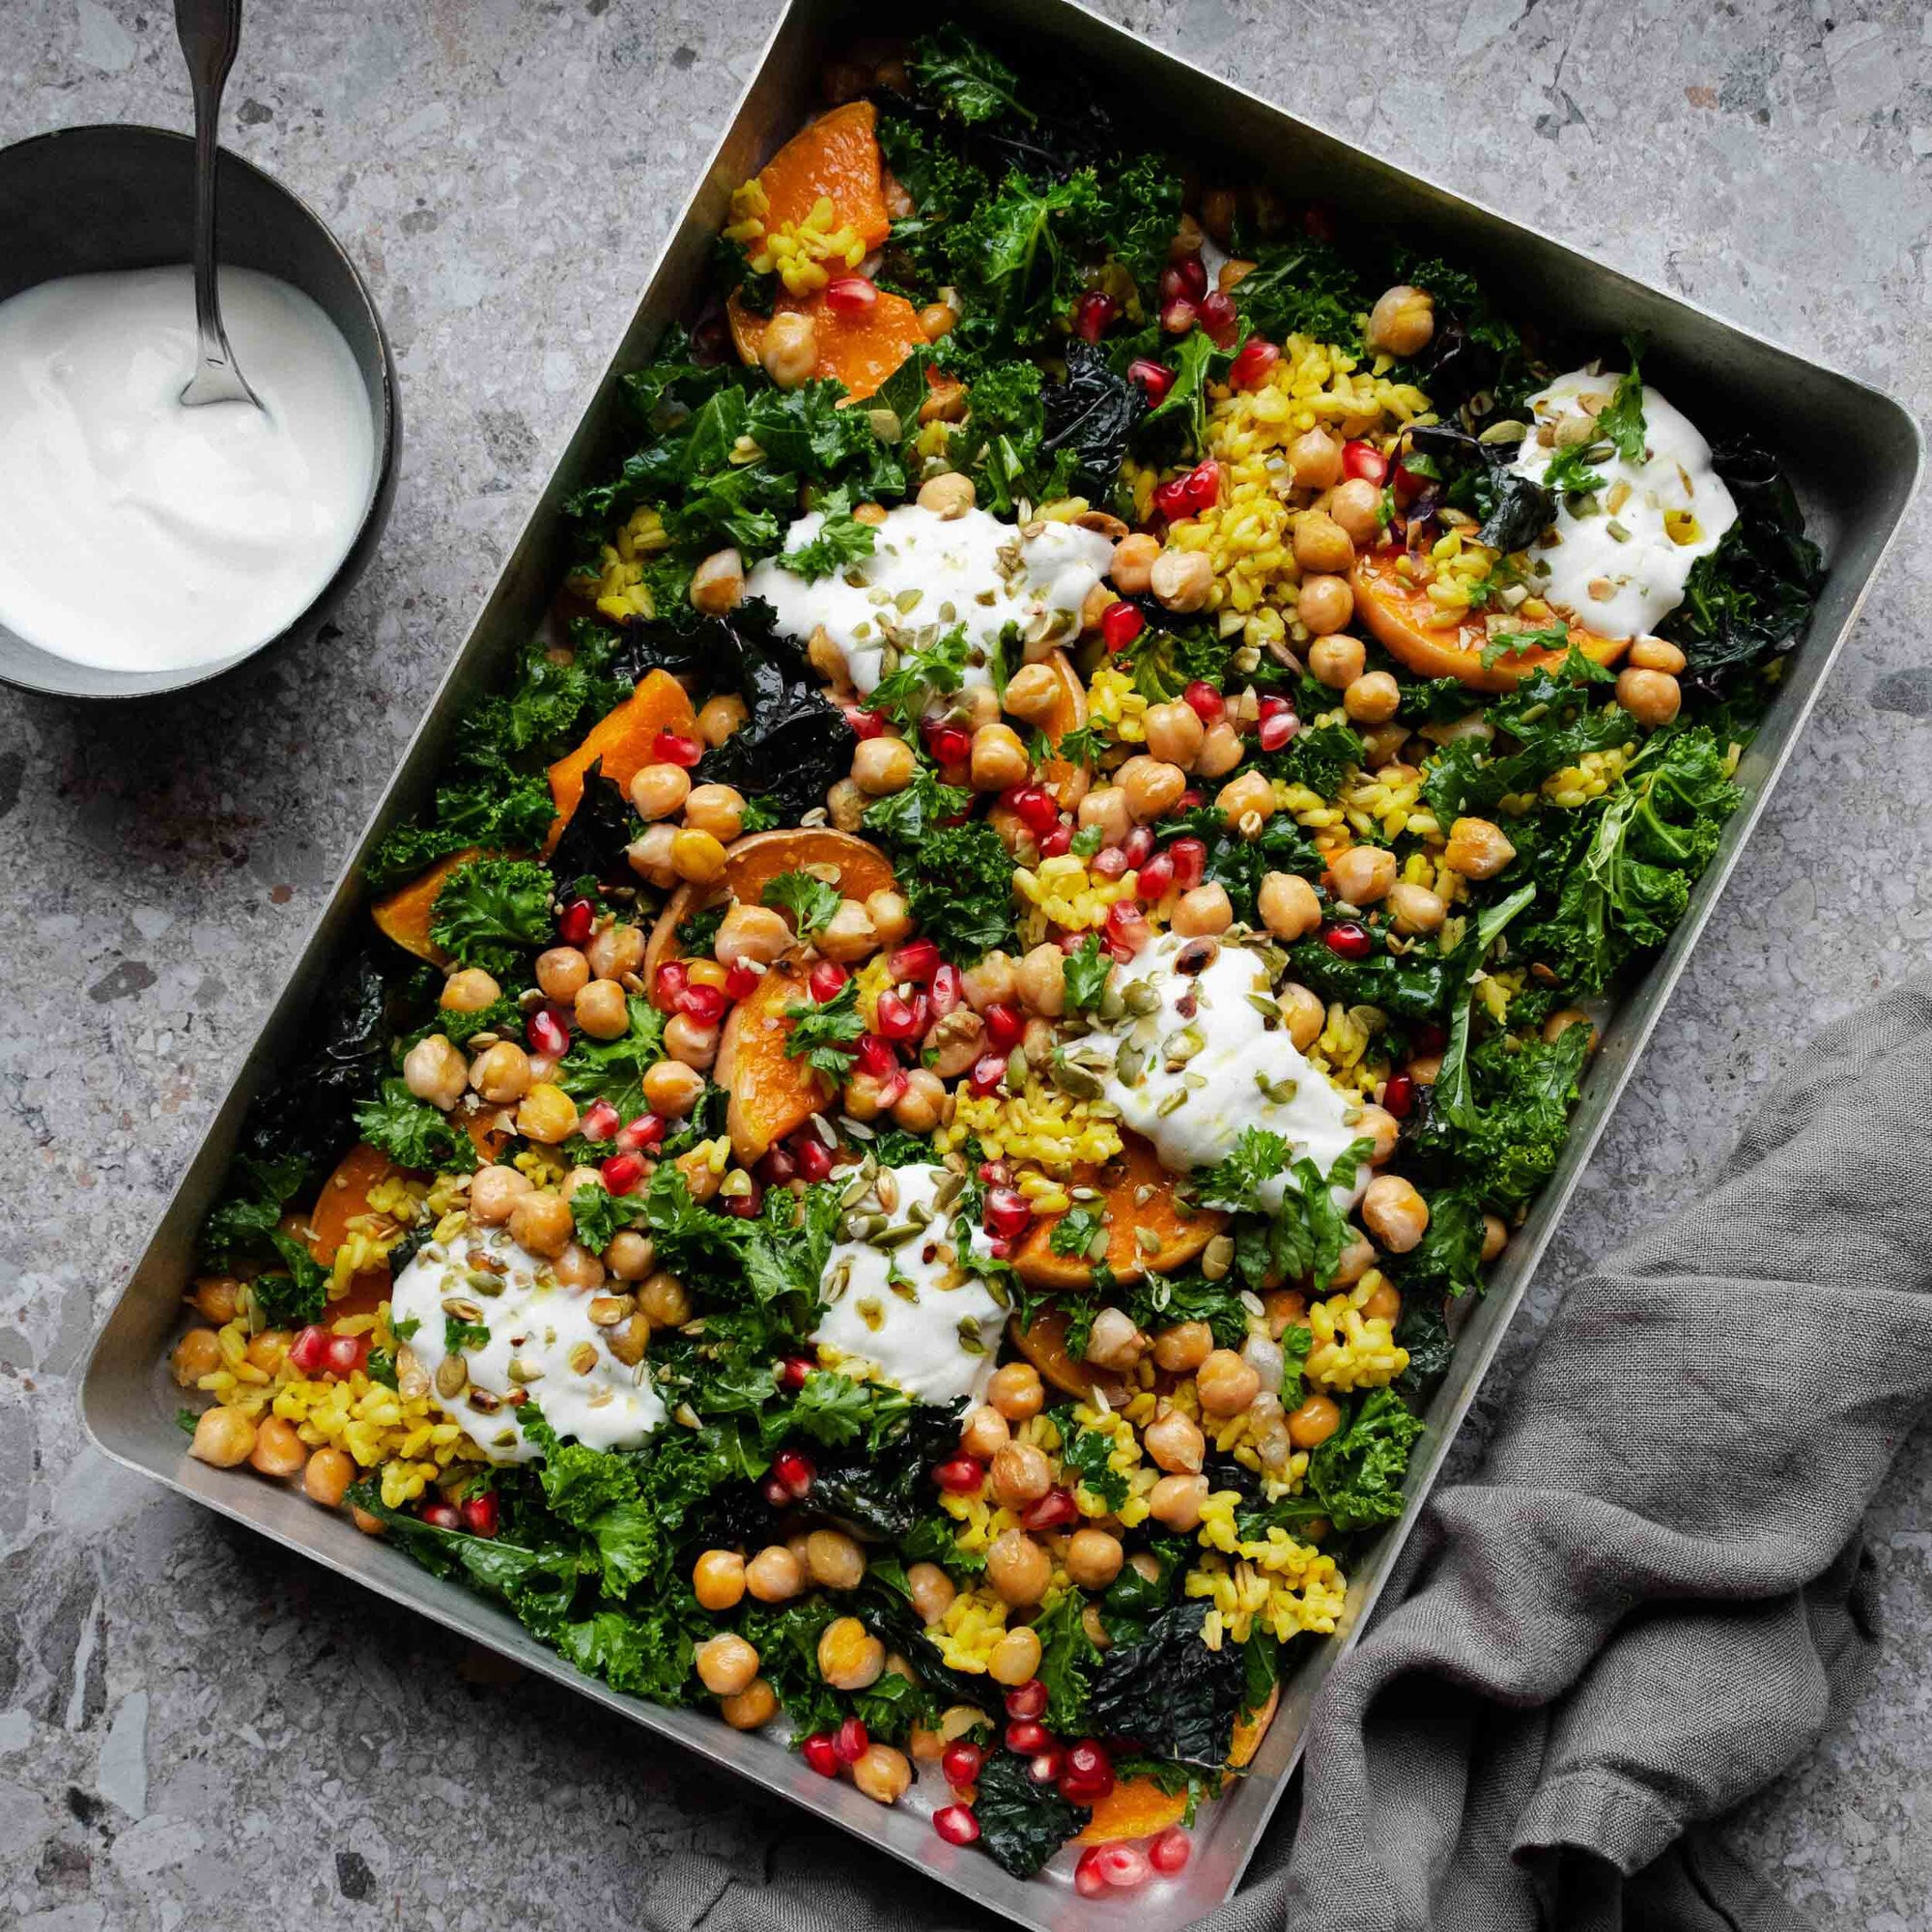 Warm Winter Salad with Roasted Squash, Kale and Chickpeas